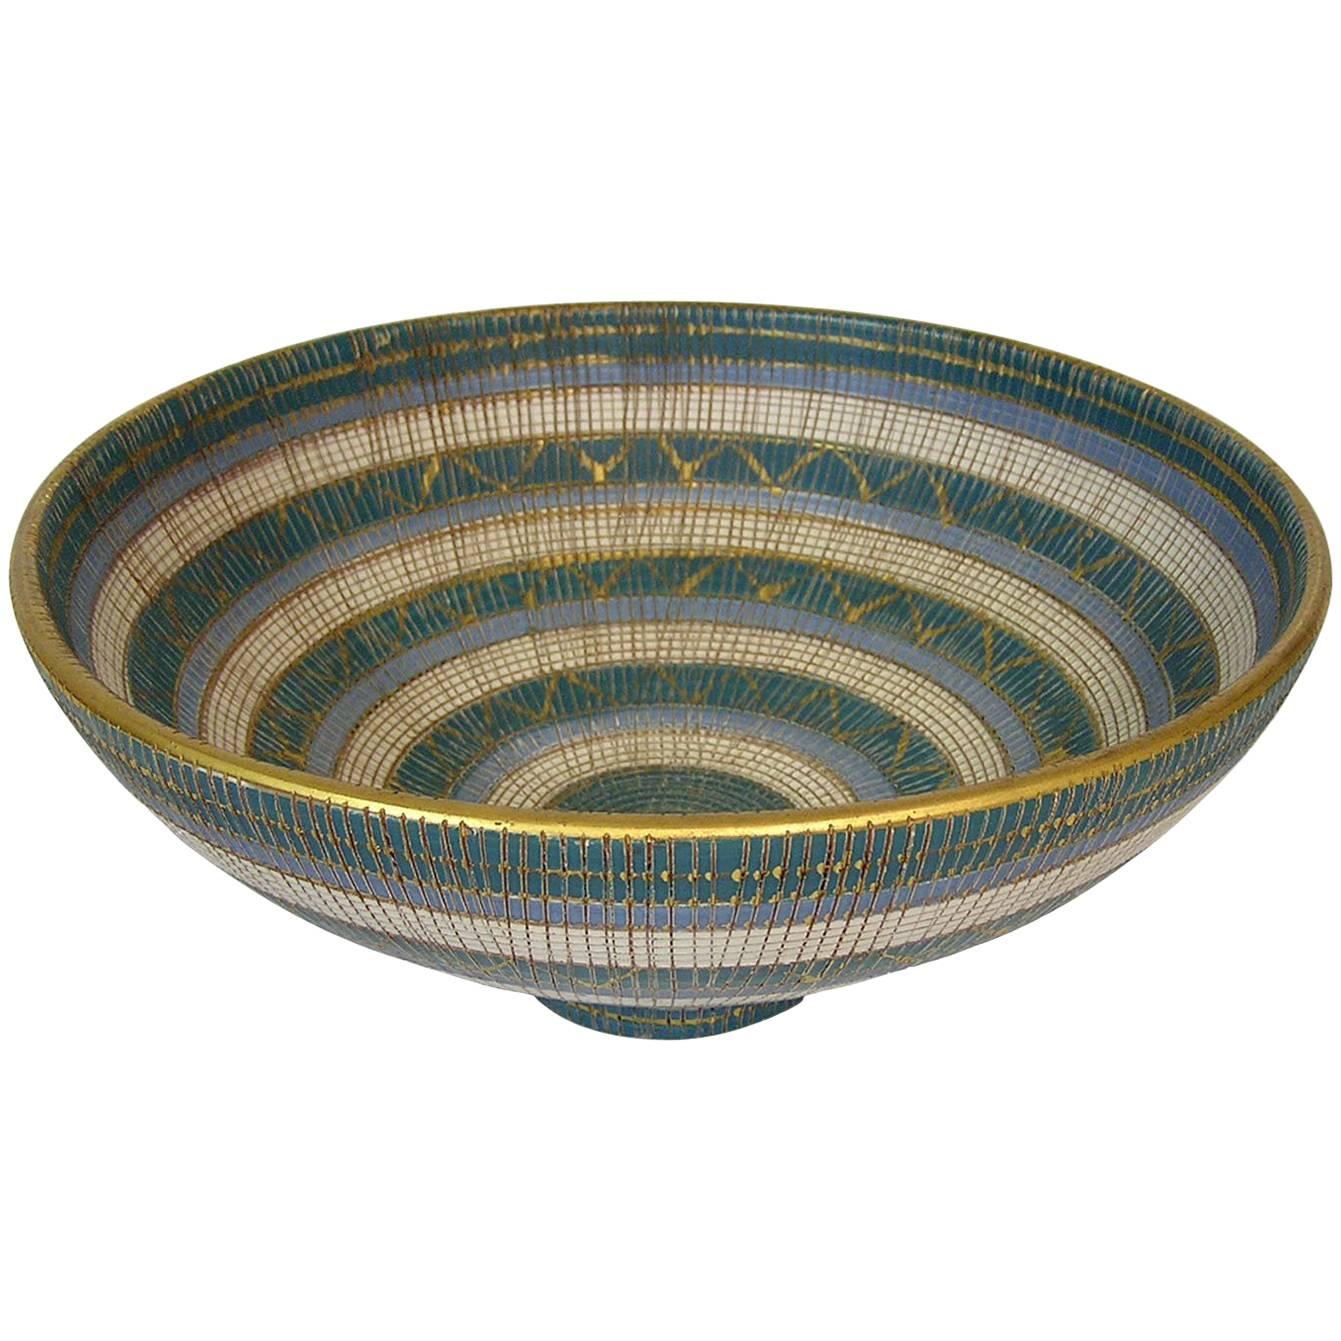 1960s Seta Series Footed Ceramic Bowl by Bitossi, Italy